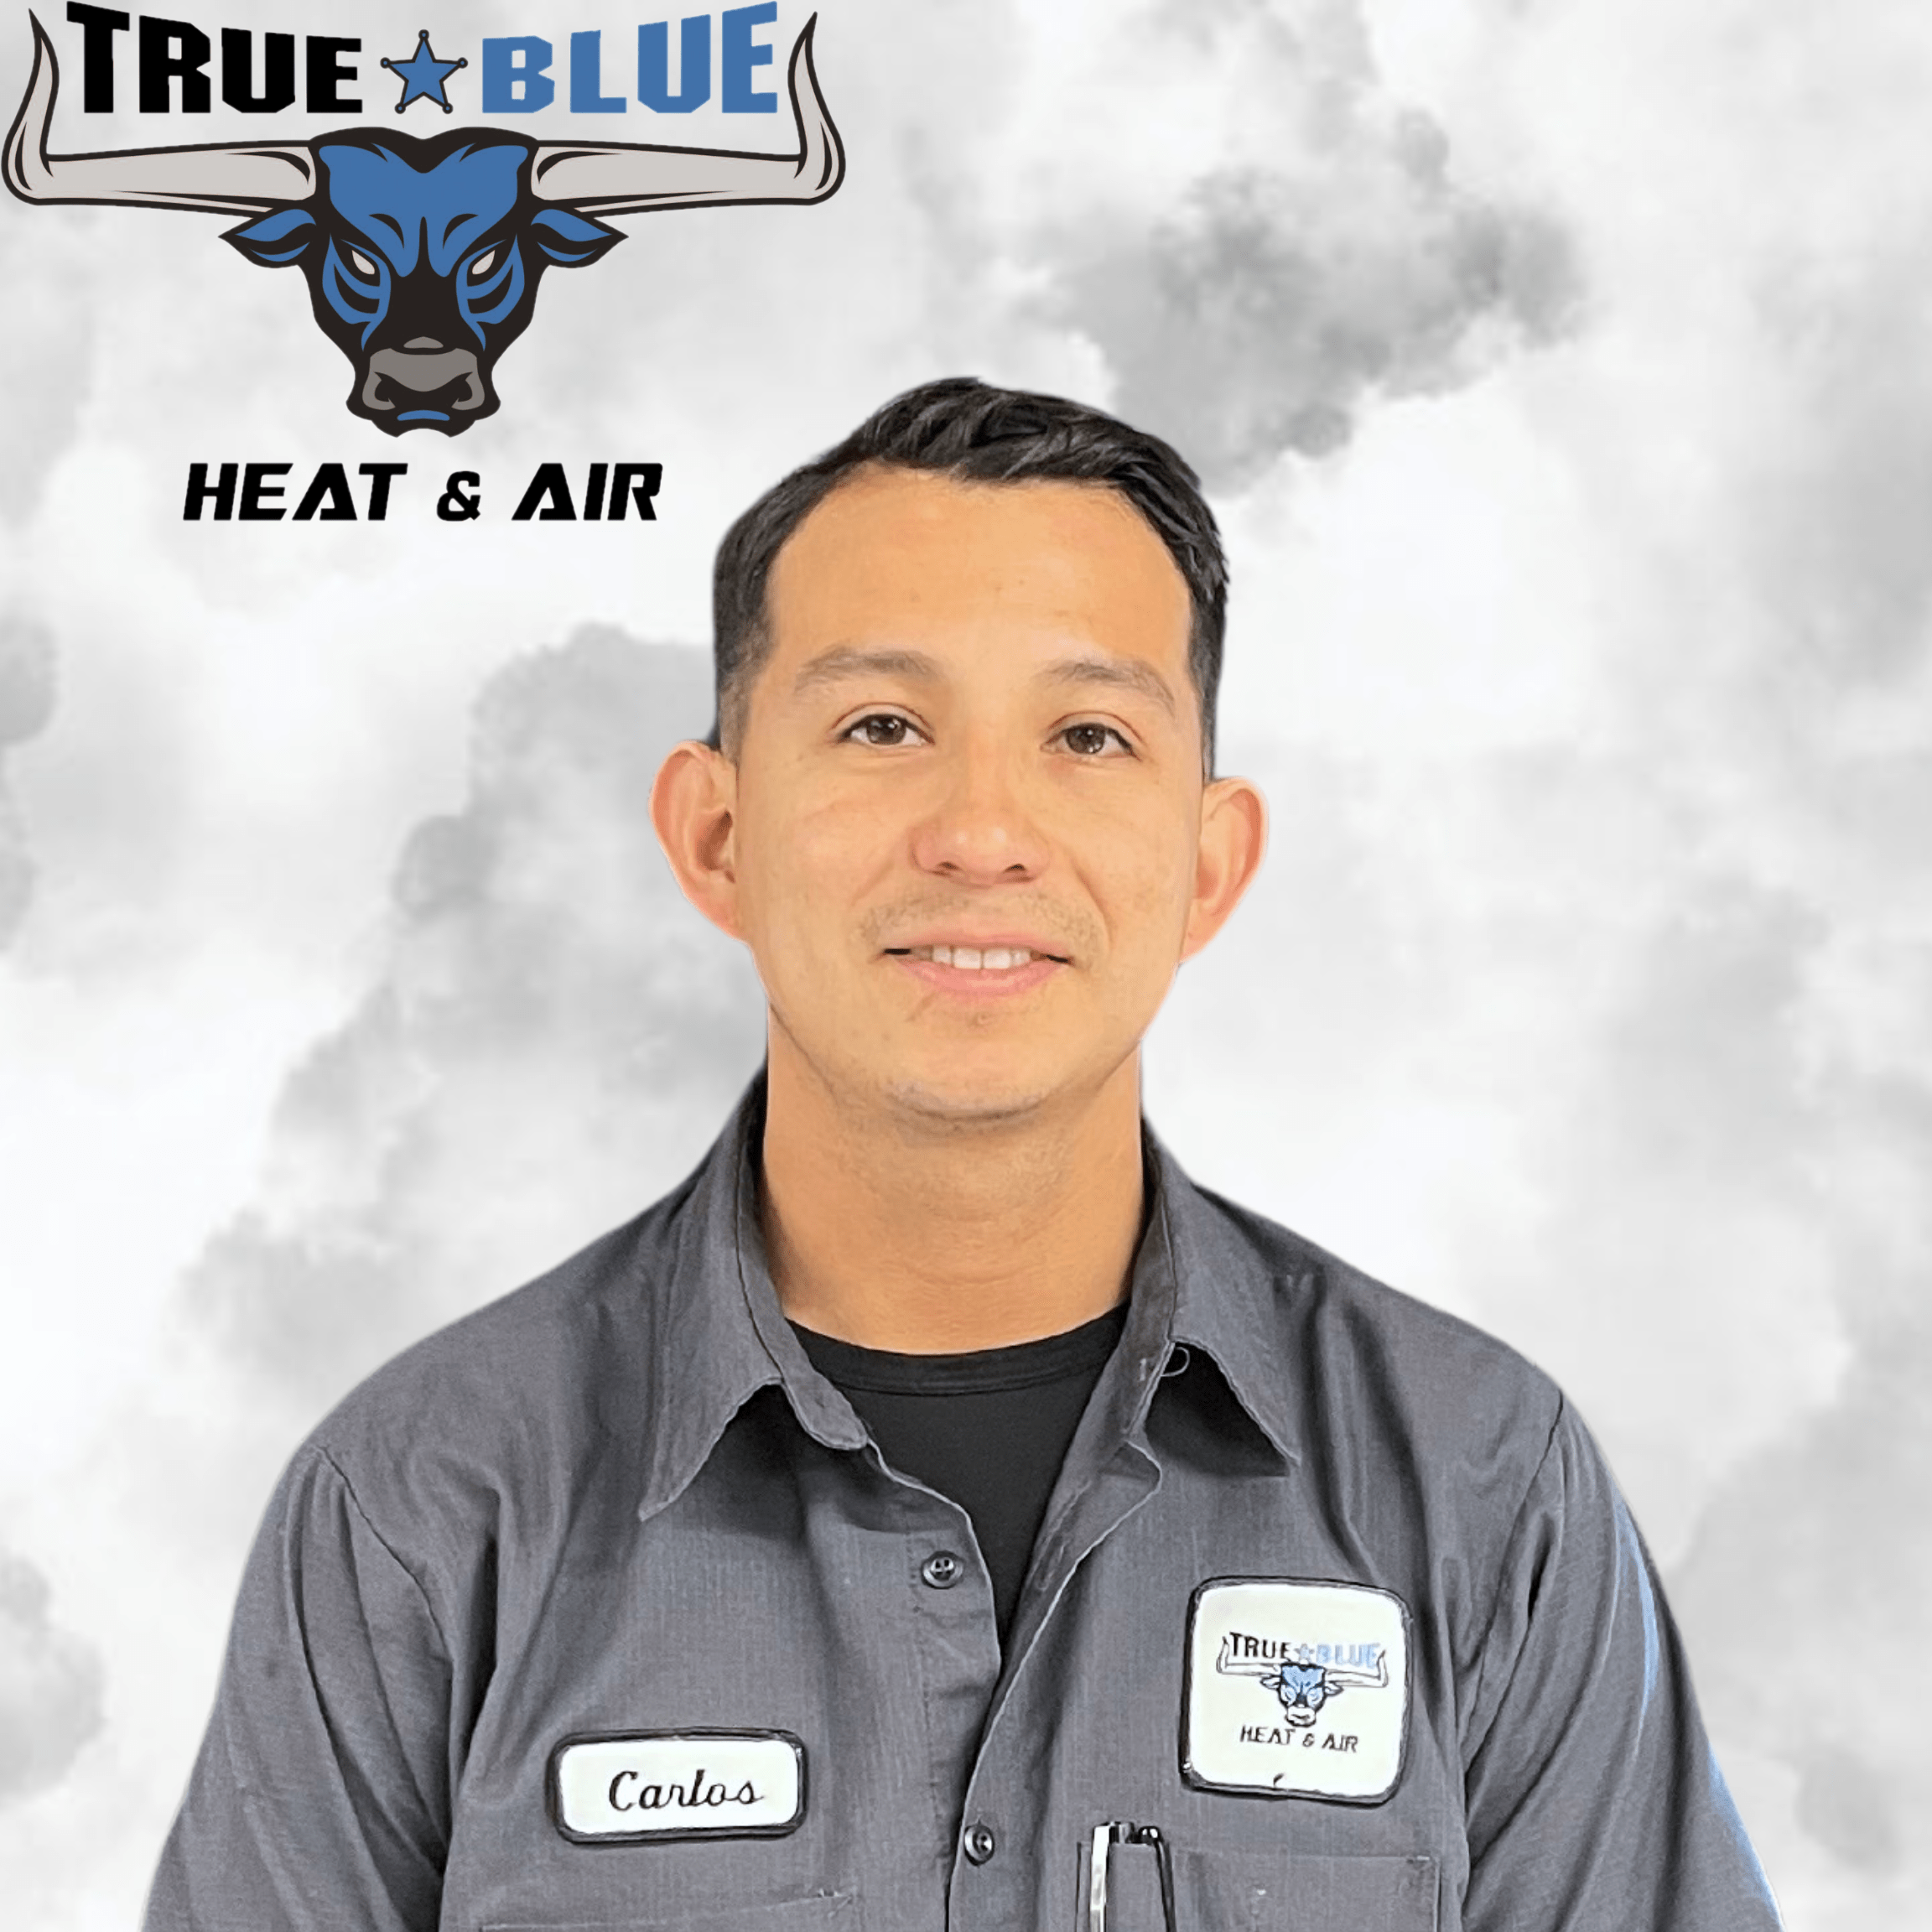 True Blue Heat and Air LLC employee of the month!